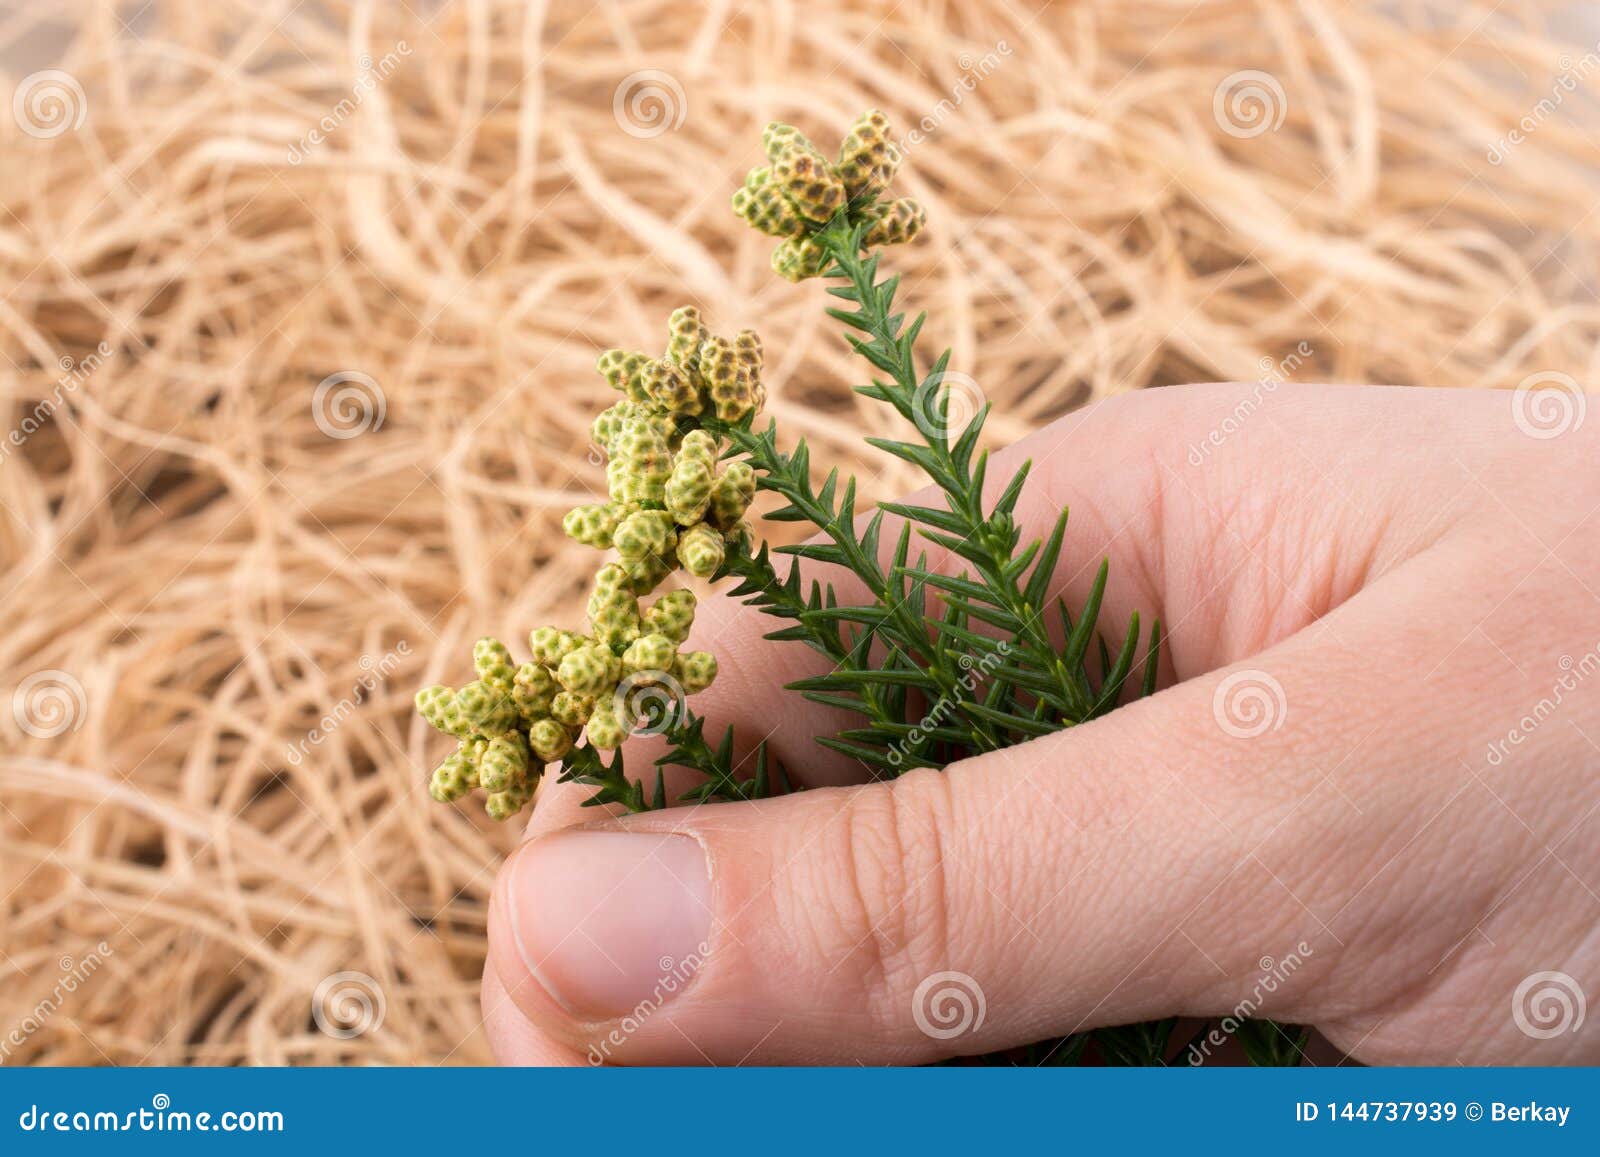 Hand Holding a Green Leaf on a White Background Stock Image - Image of